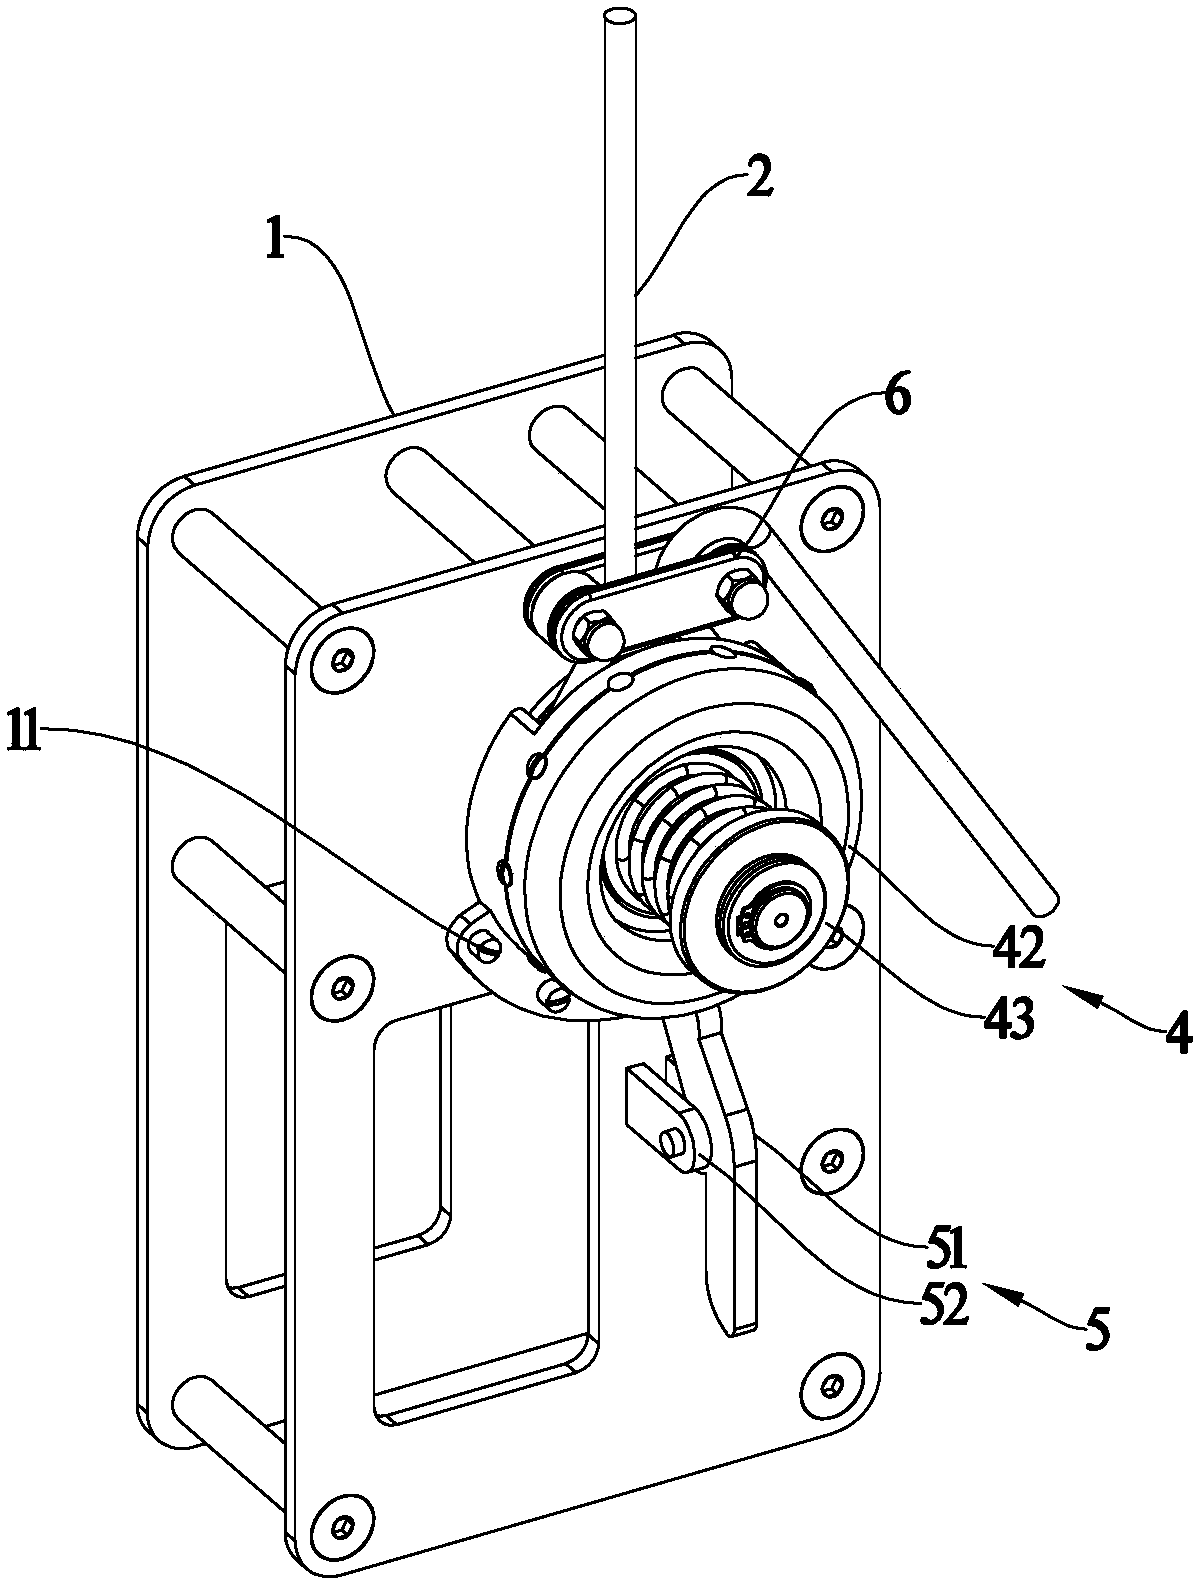 Axial compression slow descending device